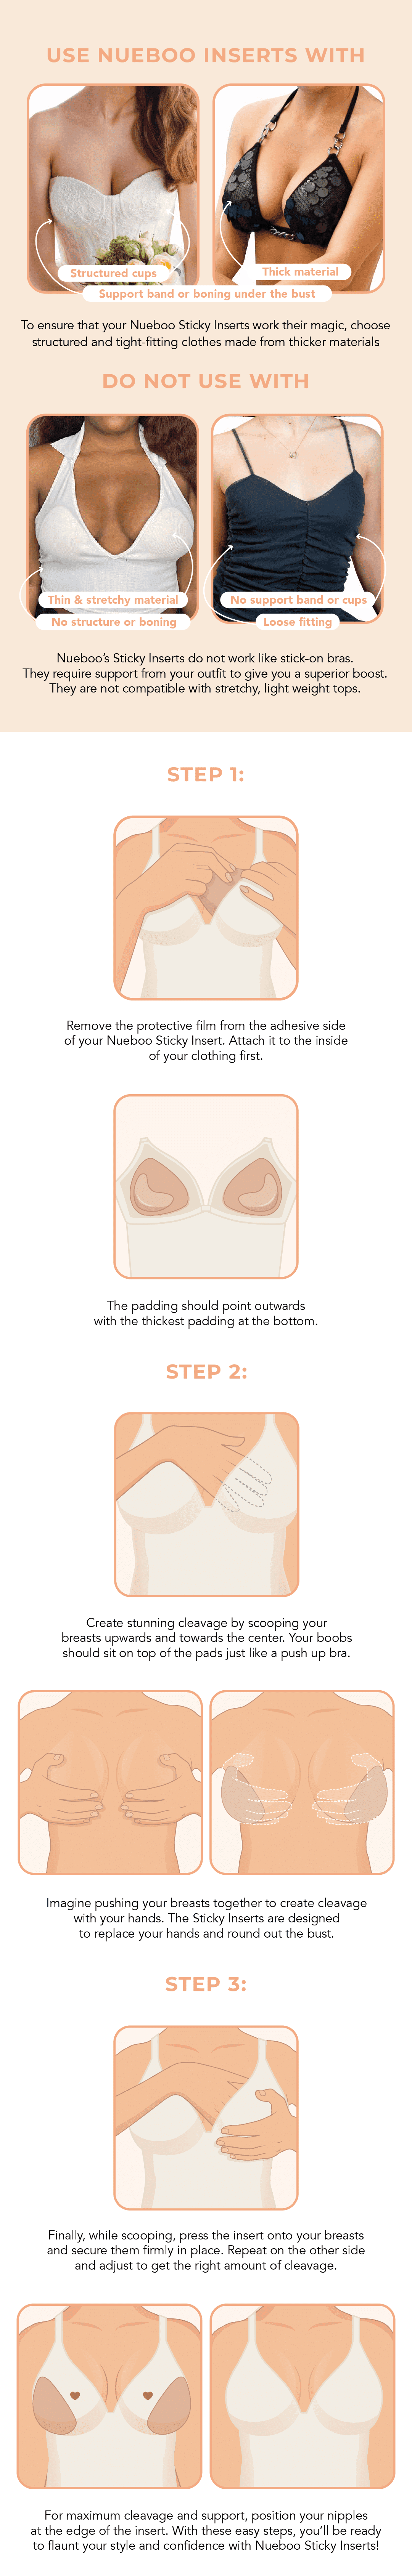 Adhesive fabric bust-enhancing cups